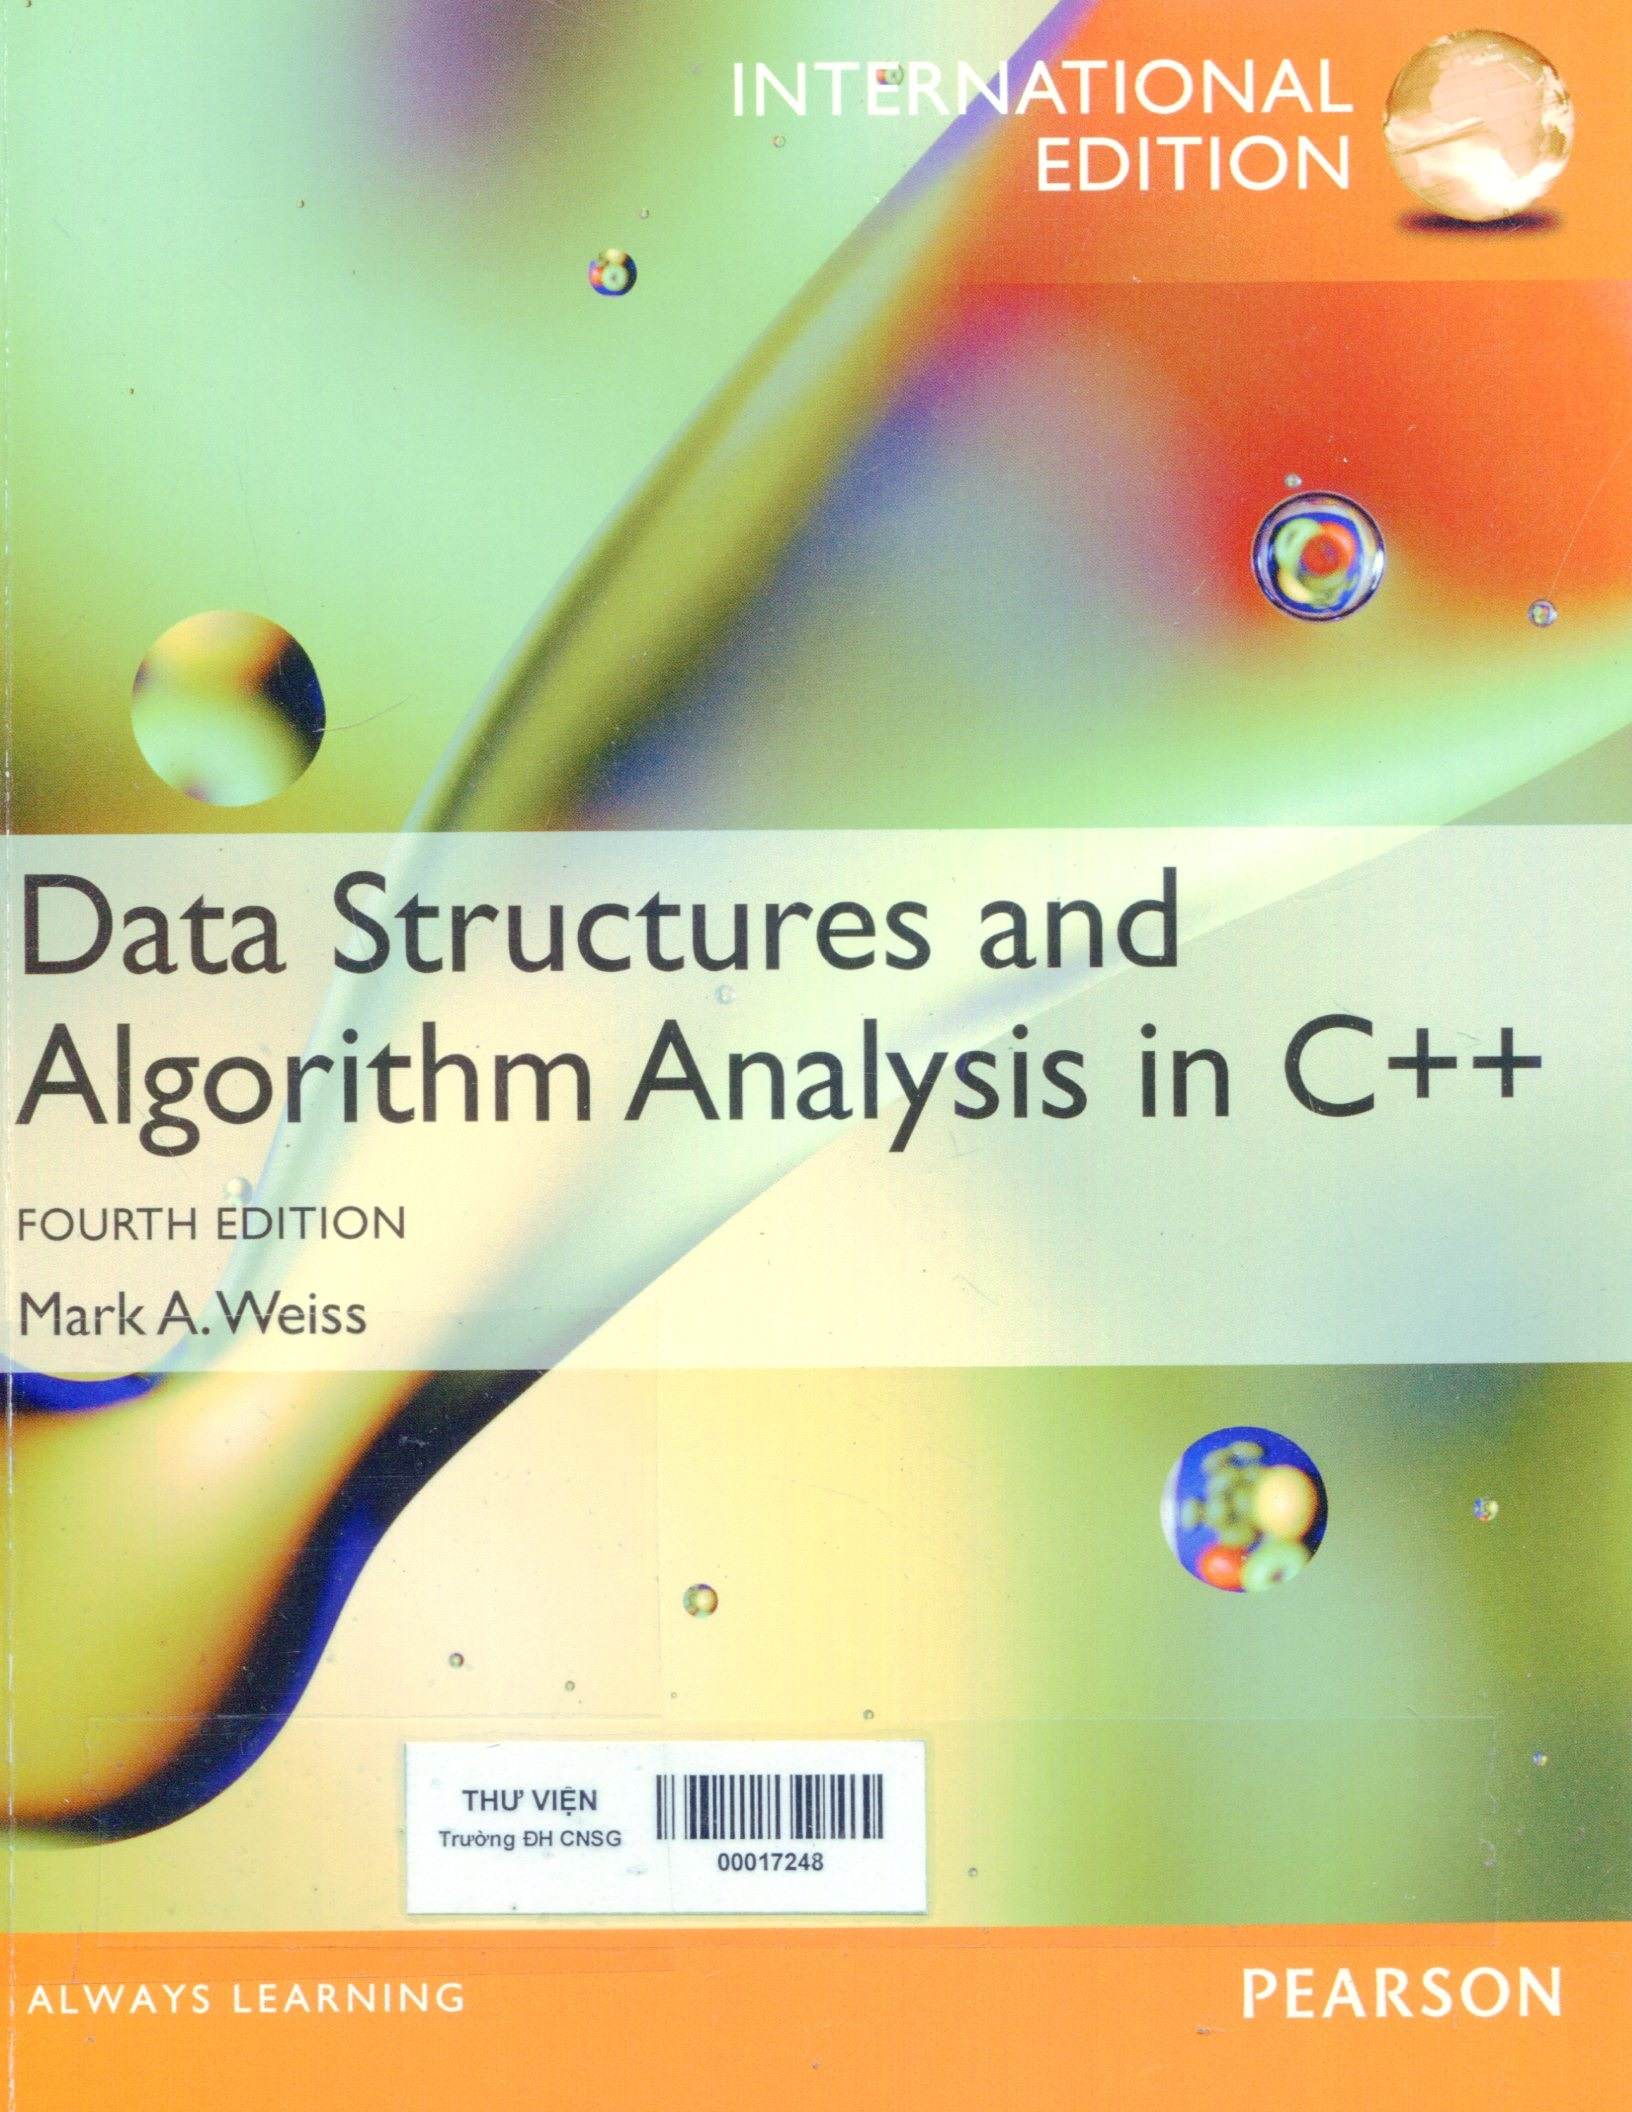 Data structures and algorithm analysis in C++